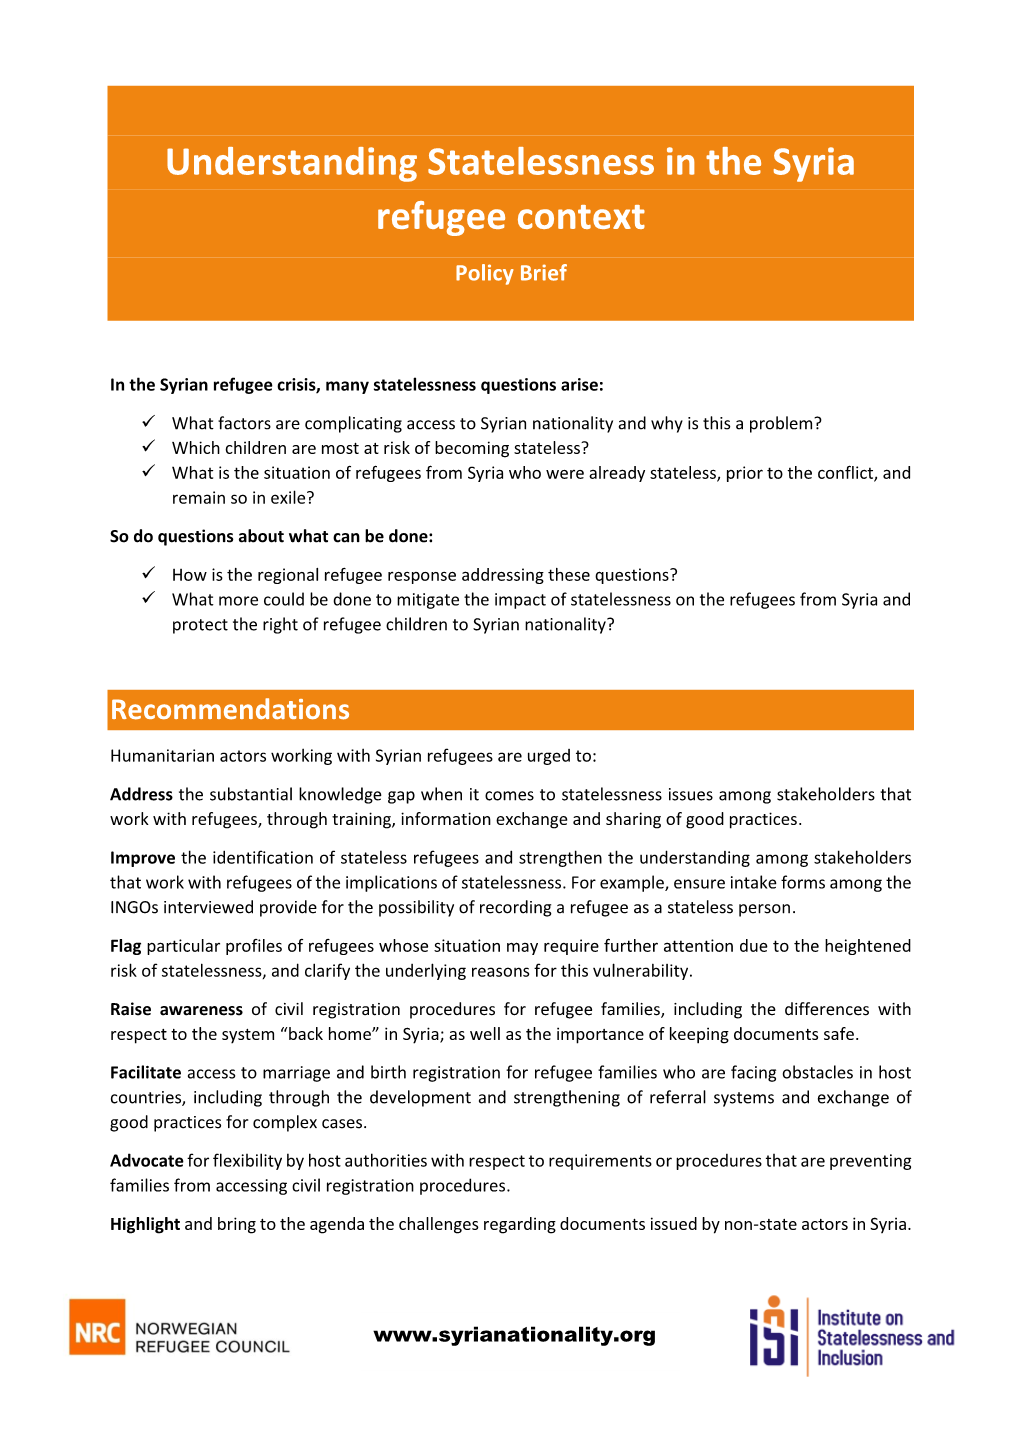 Understanding Statelessness in the Syria Refugee Context Policy Brief